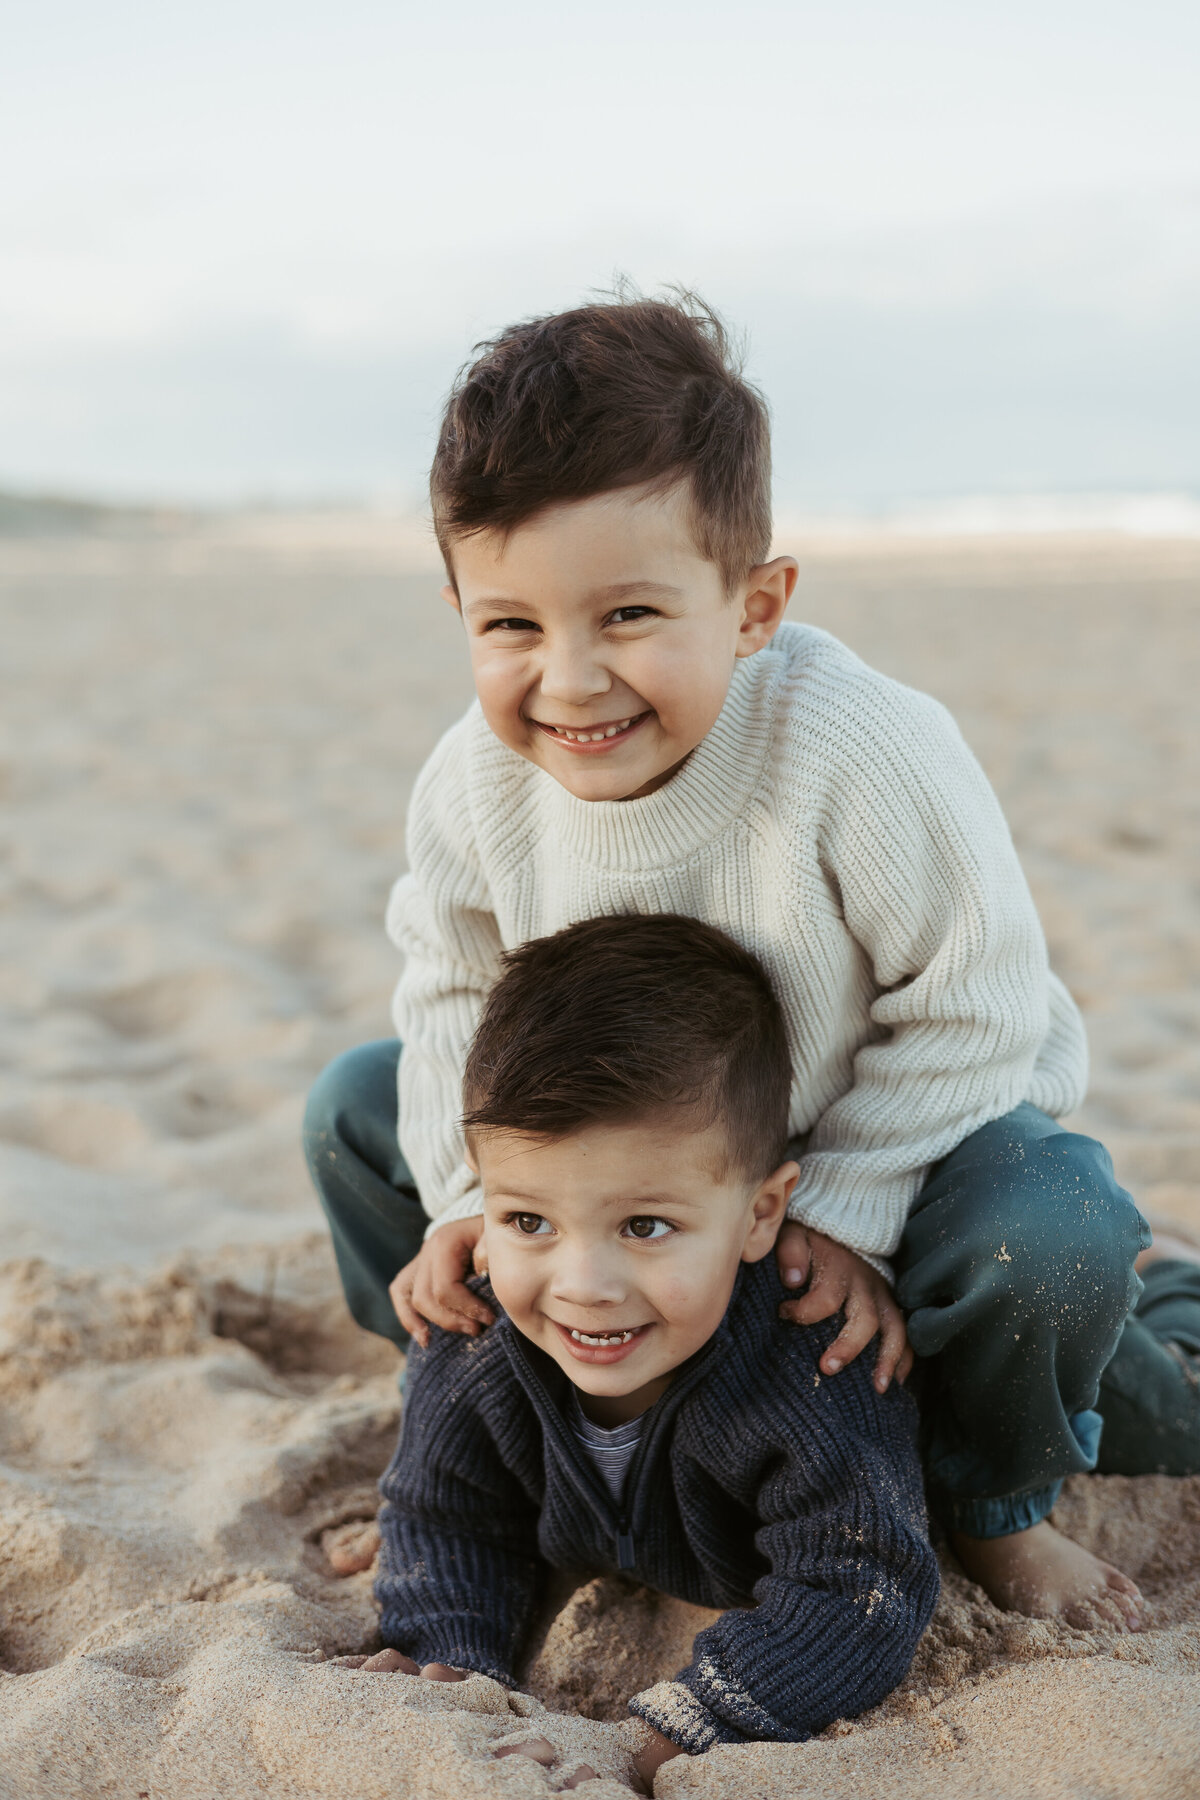 Little brother is laying in the sand while his brother sits on him and smiles for the camera.